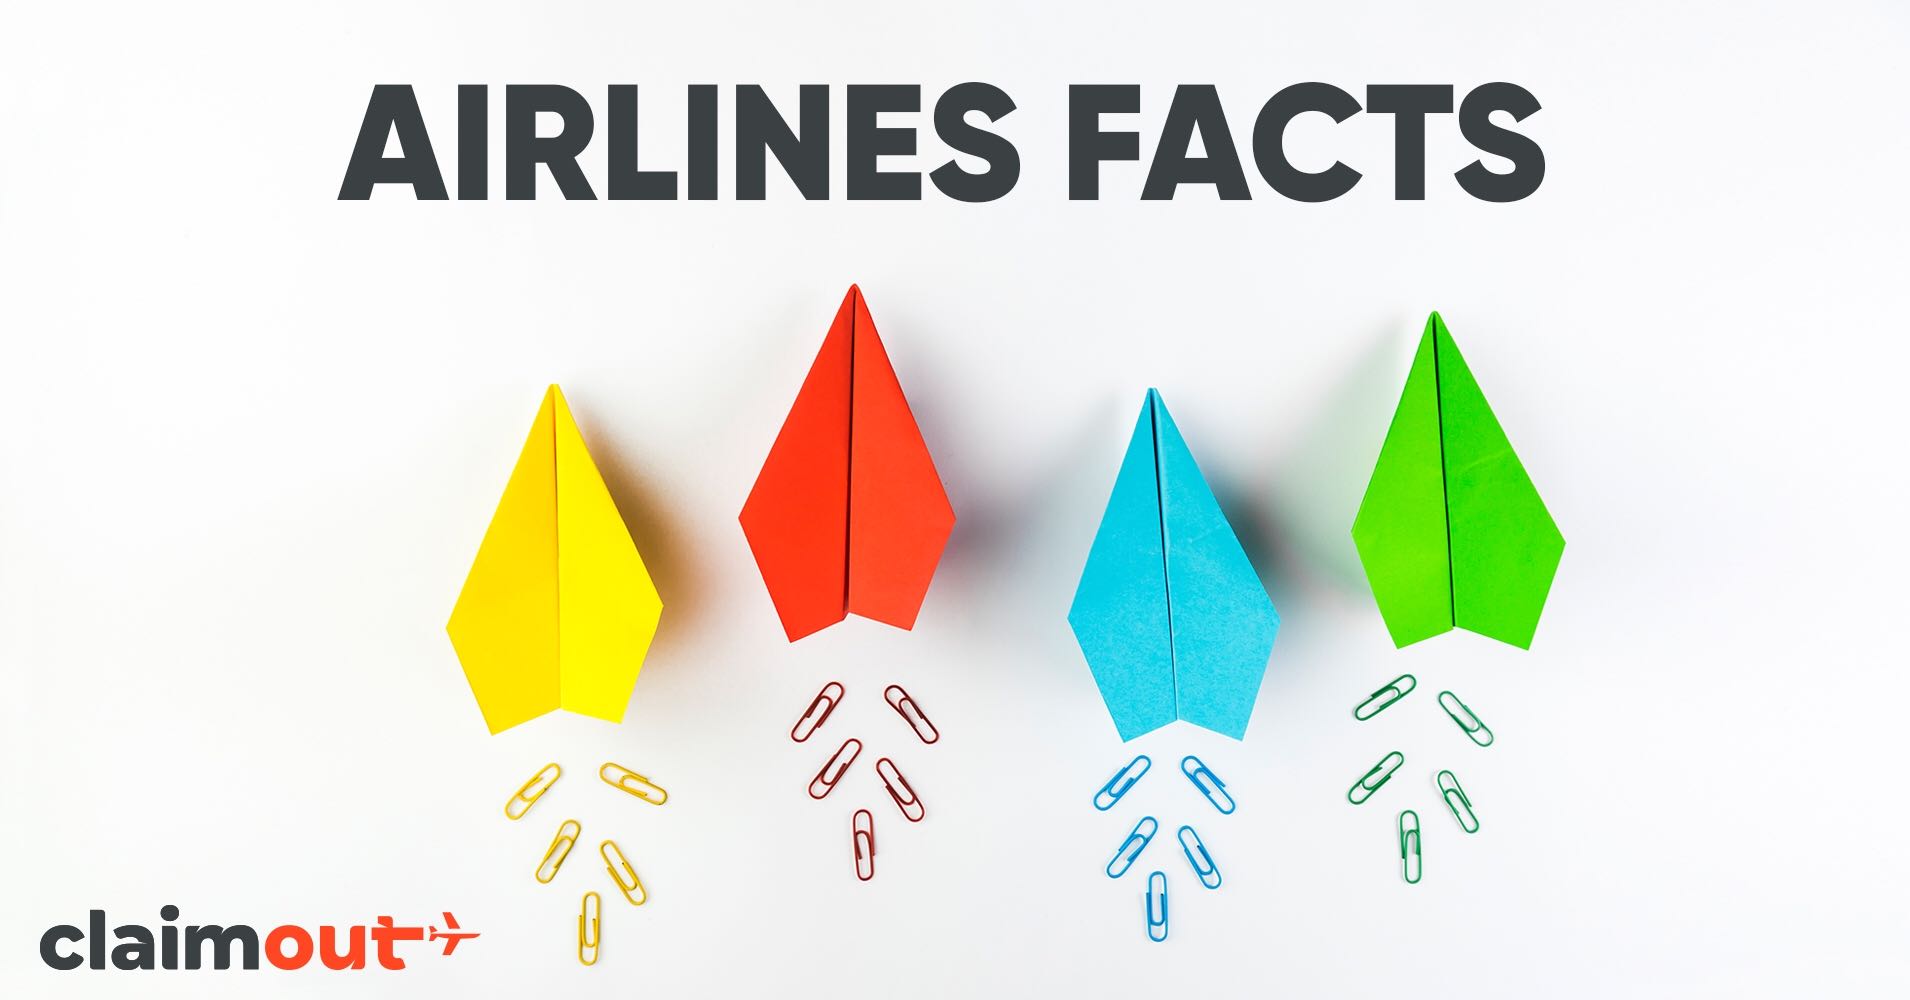 Interesting Facts About Airlines, Airplanes and Air Travel